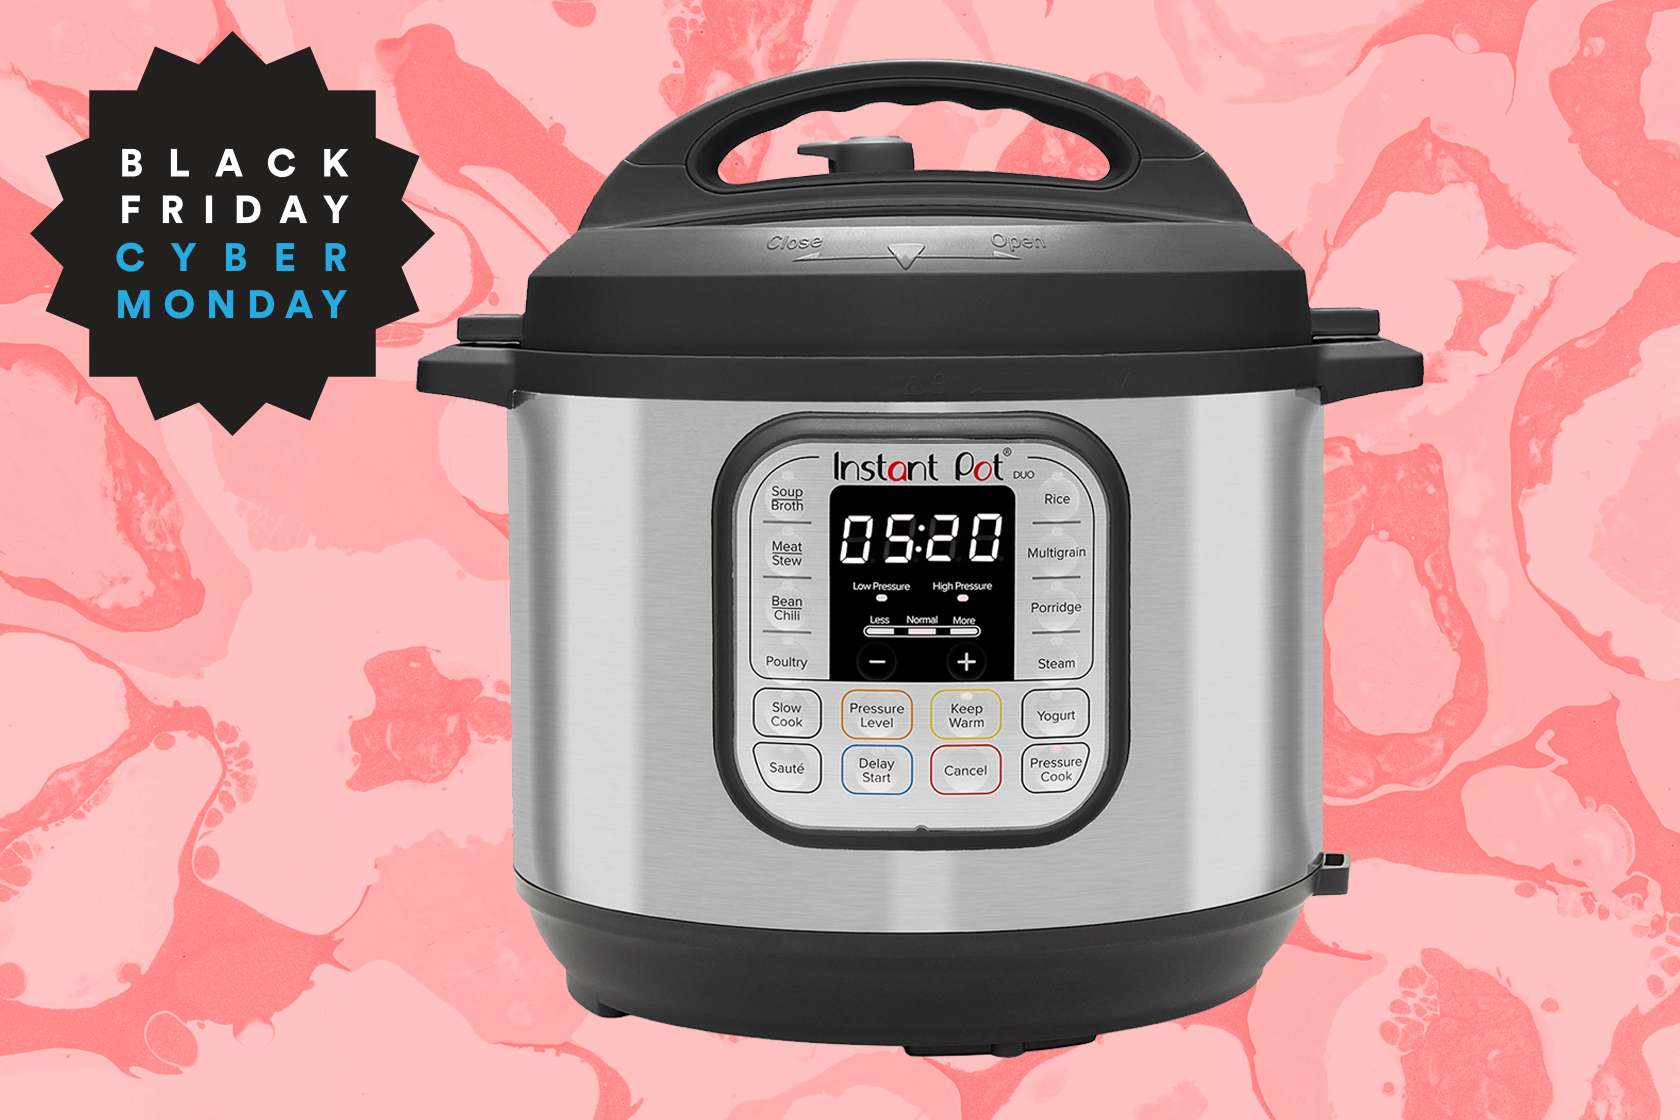 *Condensation Collector Only* Instant Pot 6 Quart Duo Pressure Cooker